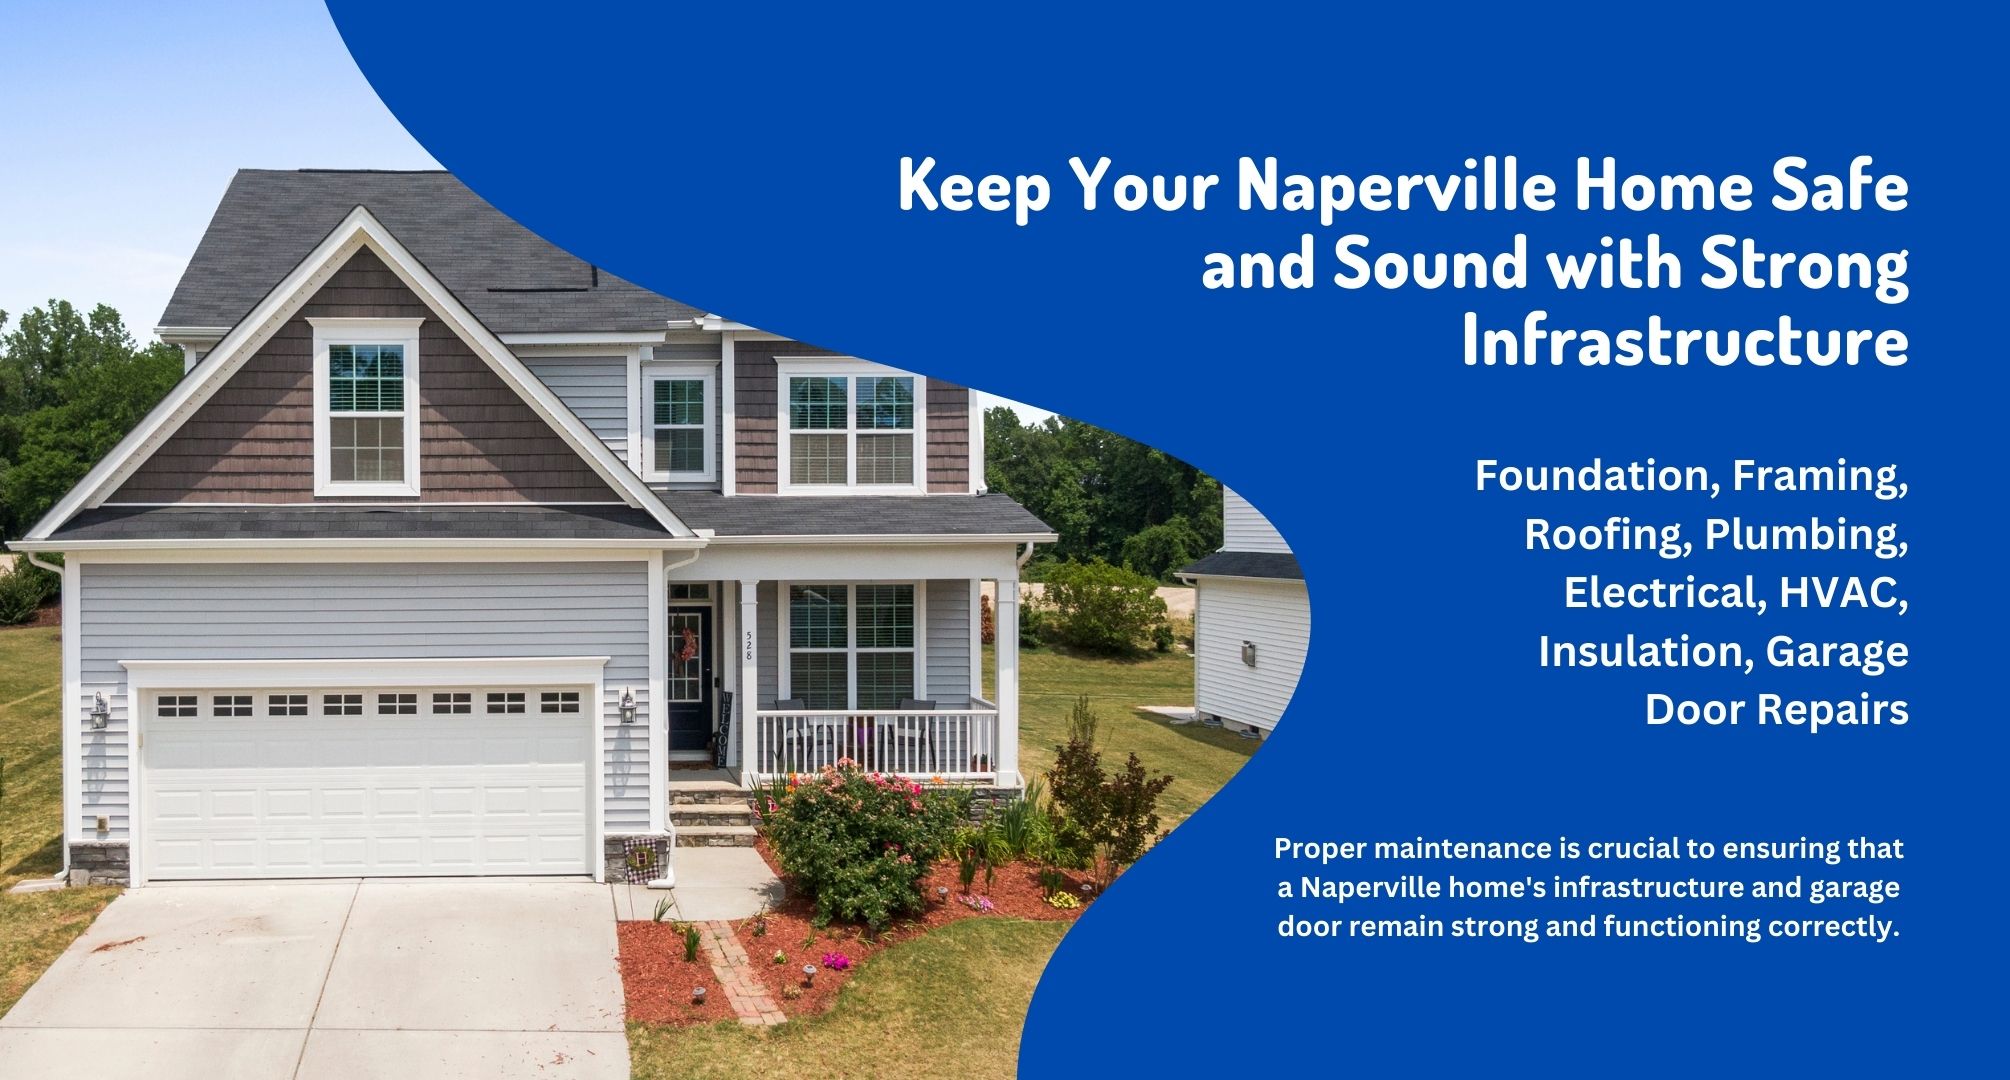 Proper maintenance is crucial to ensuring that a Naperville home's infrastructure and garage door remain strong and functioning correctly.